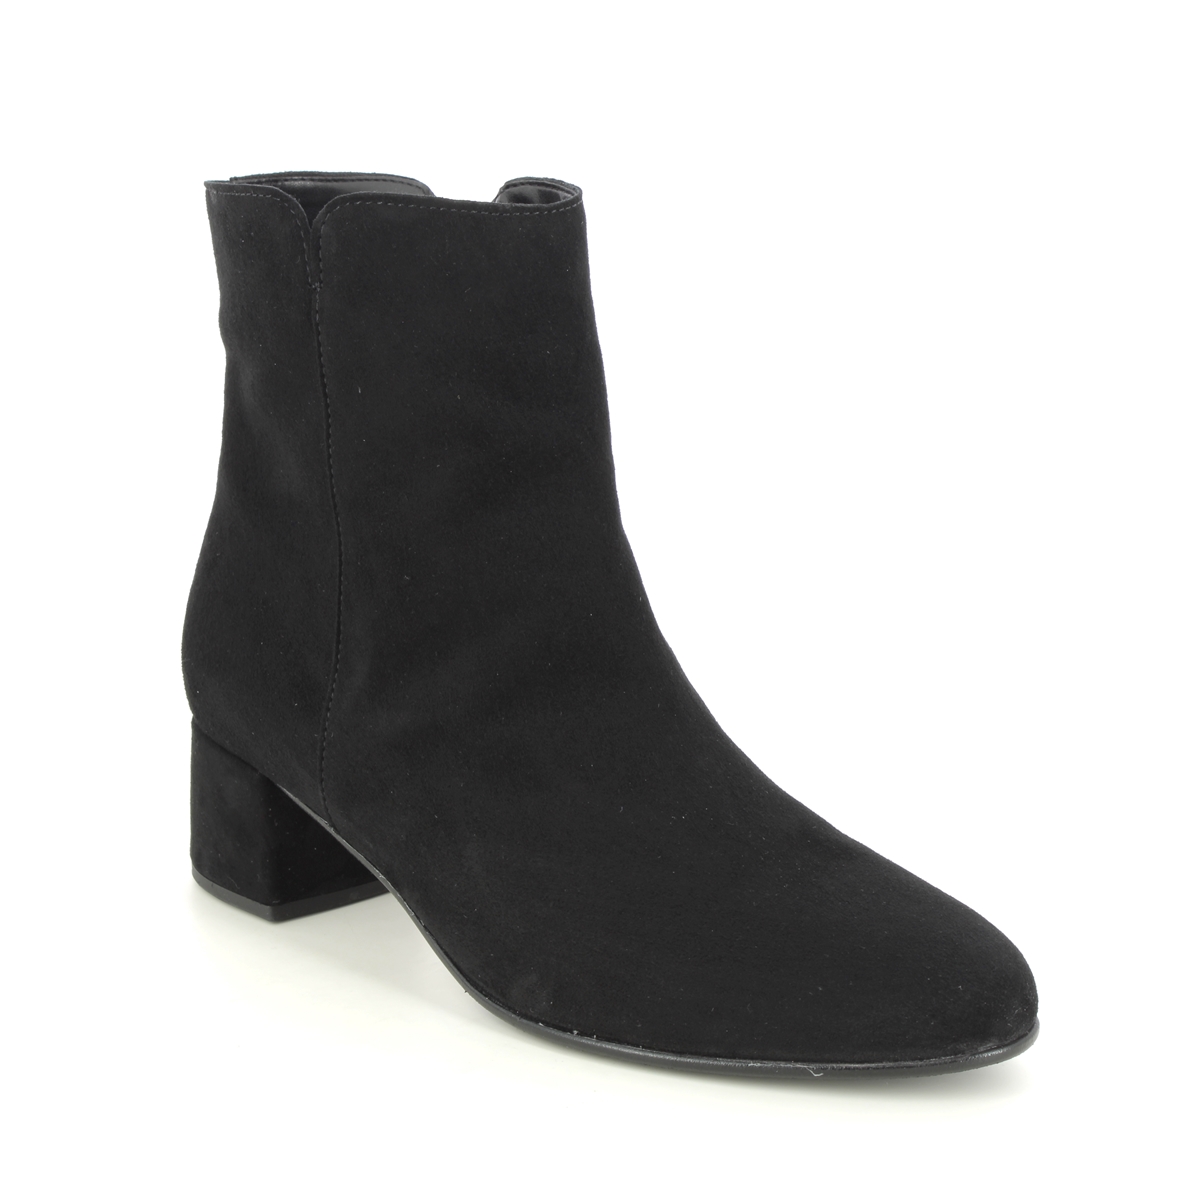 Gabor Abbey Black Suede Womens Heeled Boots 35.680.17 in a Plain Leather in Size 7.5